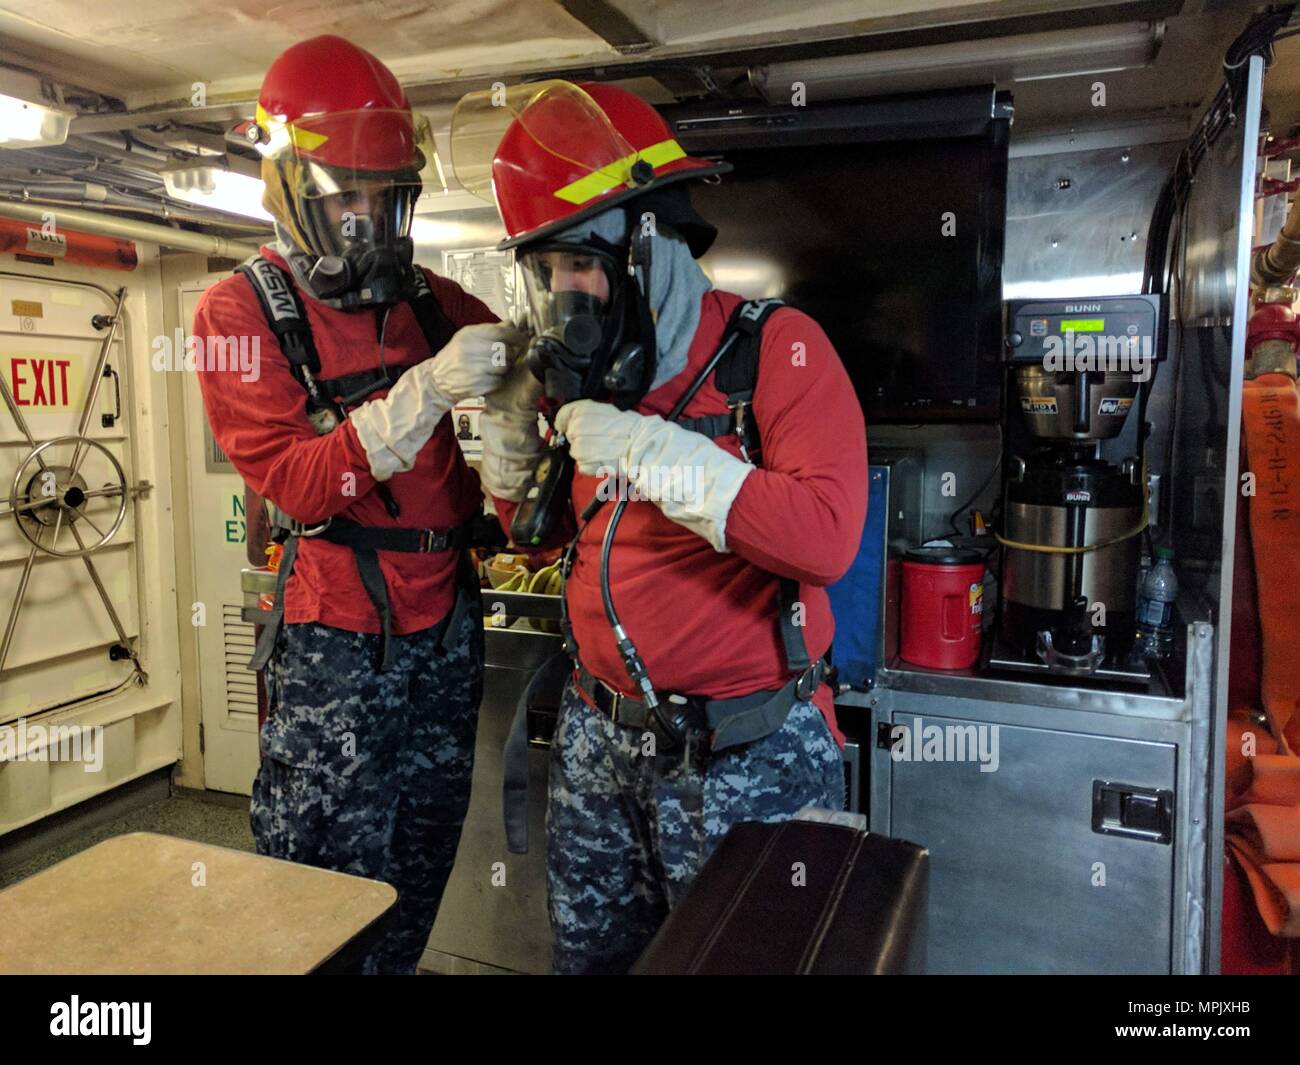 U.S. Naval Sea Cadet Corps cadets prepare to conduct firefighting training aboard the Coast Guard Cutter Galveston Island (WPB 1349) off of Honolulu, March 11, 2017. The USNSCC is a Navy-based organization, which serves to teach teens about sea-going military services, U.S. naval operations and training, community service, discipline and teamwork. (U.S. Coast Guard photo by Petty Officer 1st Class Joe Jorgenson/Released) Stock Photo